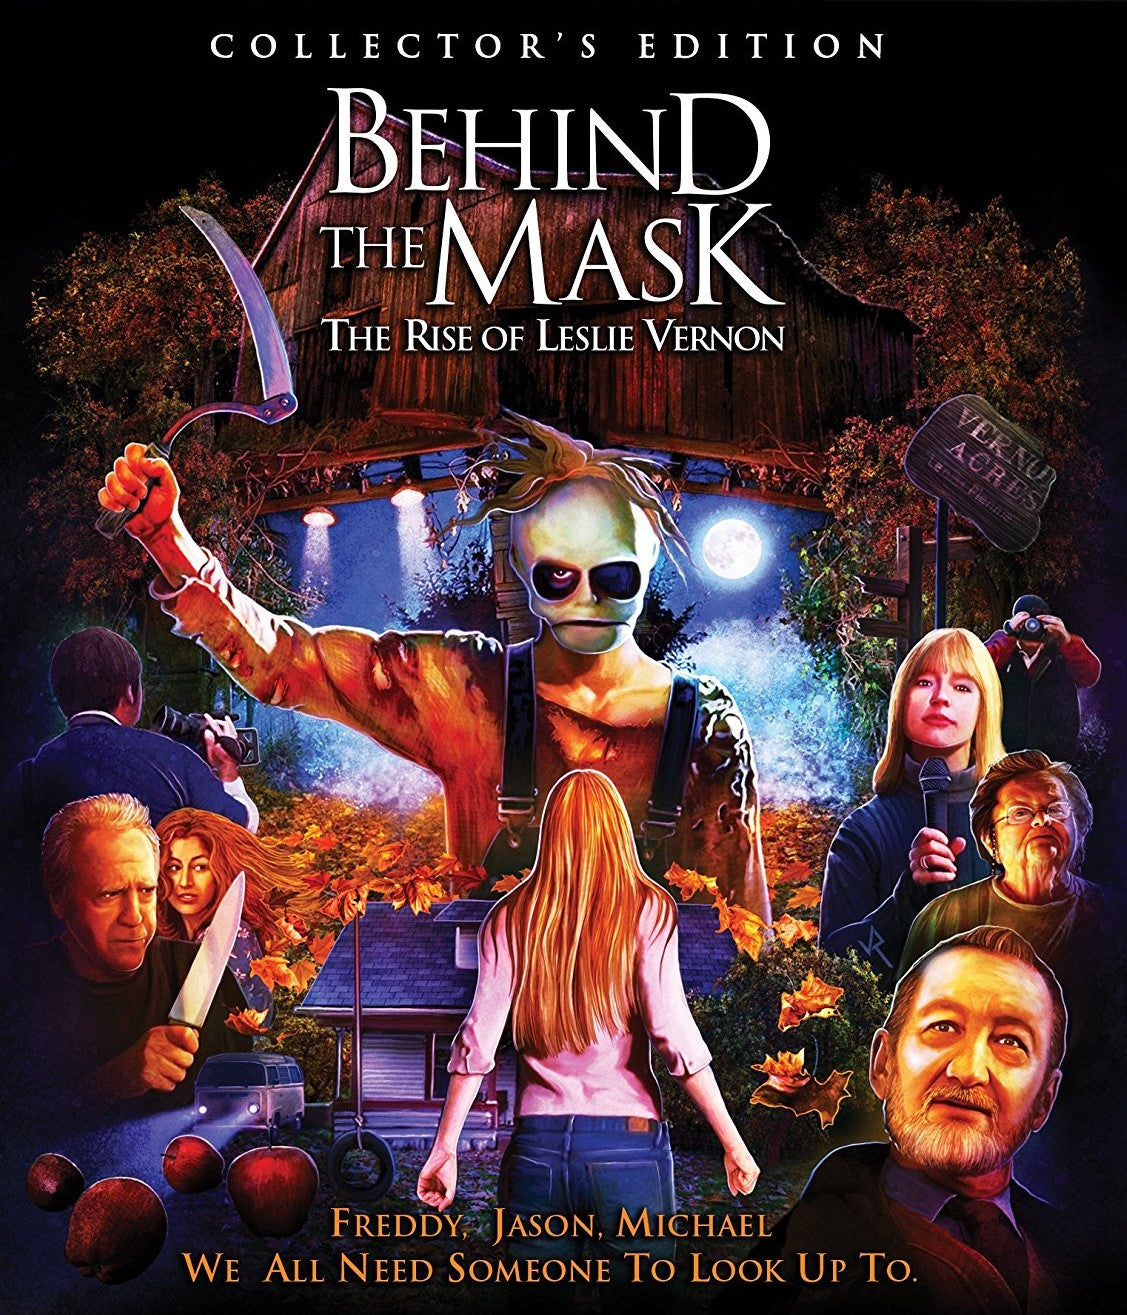 Behind The Mask: Rise Of Leslie Vernon (Collectors Edition) Blu-Ray Blu-Ray